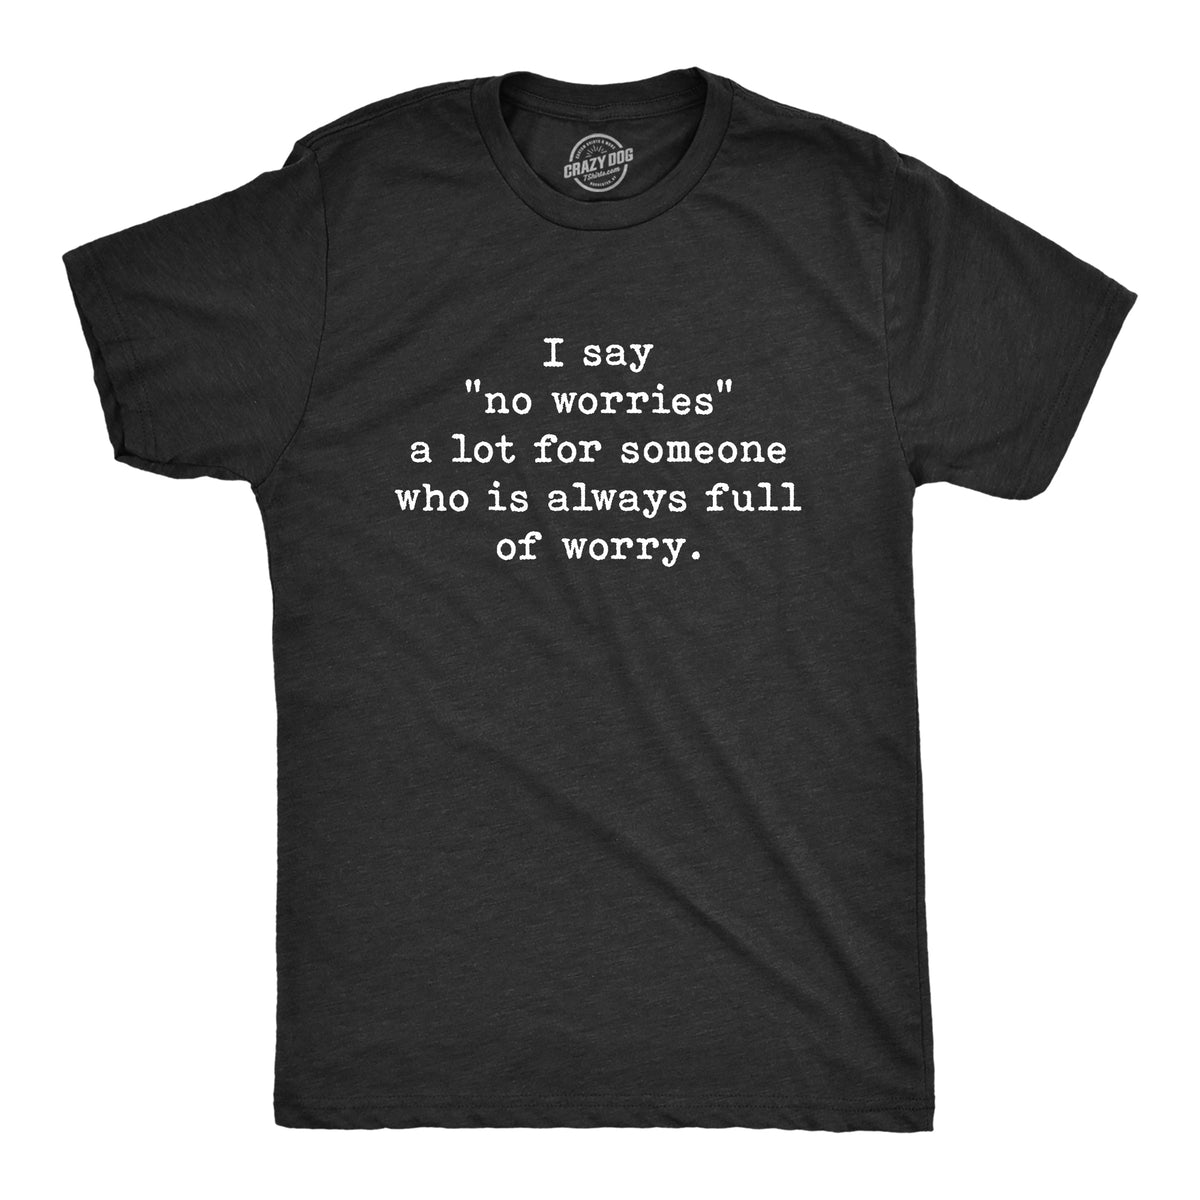 Funny Heather Black No Worries Full Of Worry Mens T Shirt Nerdy introvert Nerdy Tee